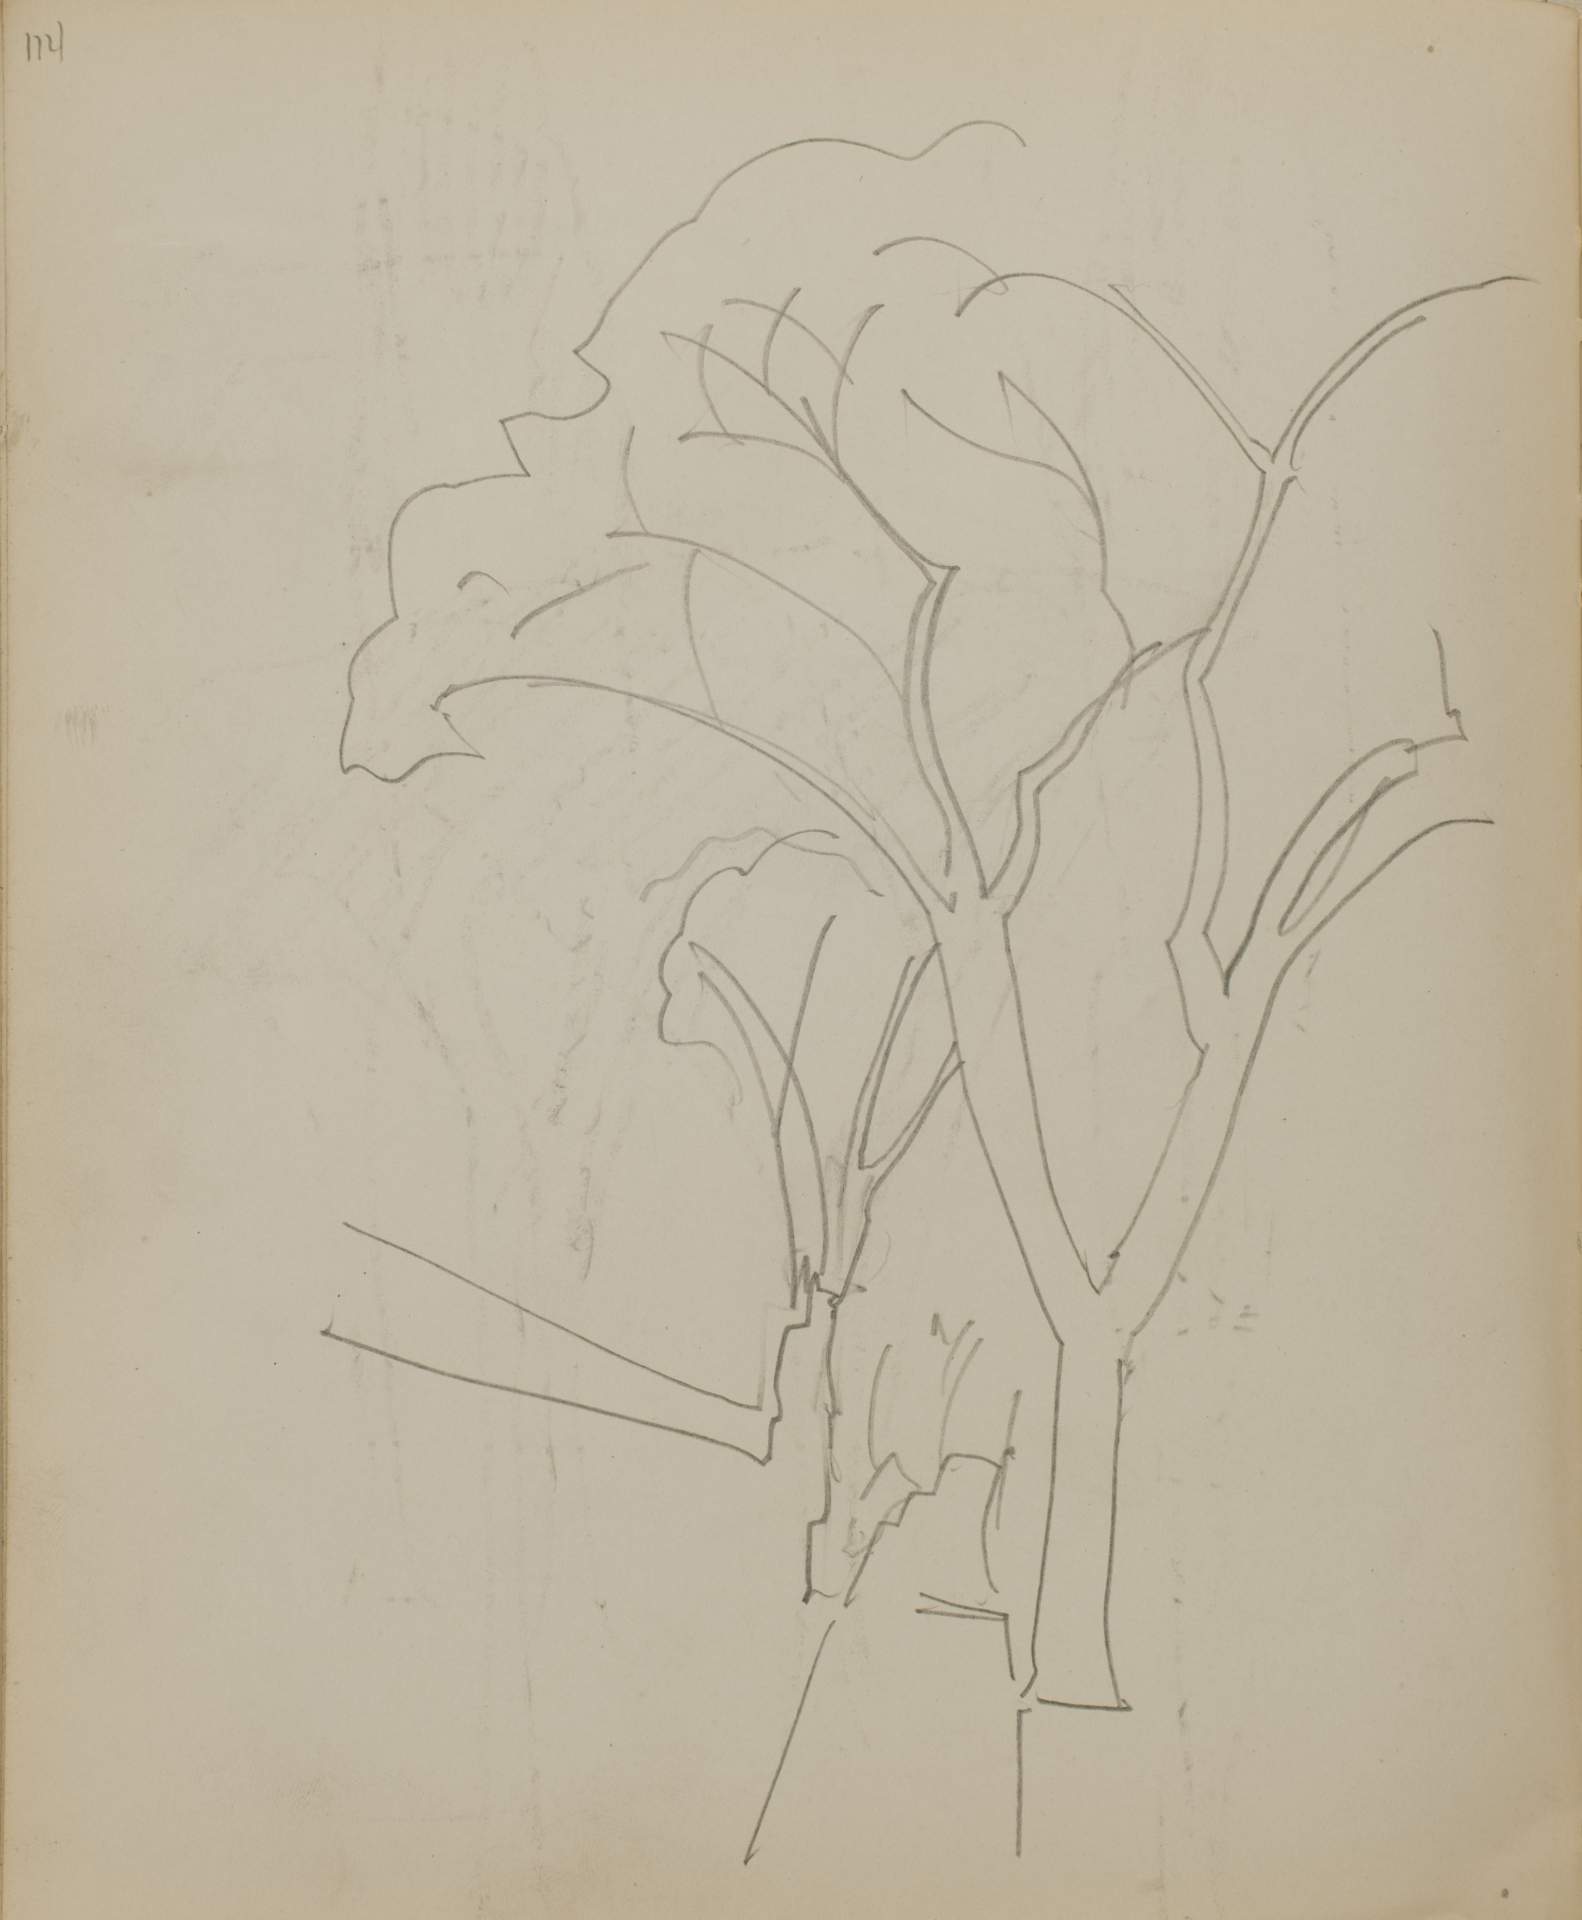 Untitled (sketch of two trees and a path)